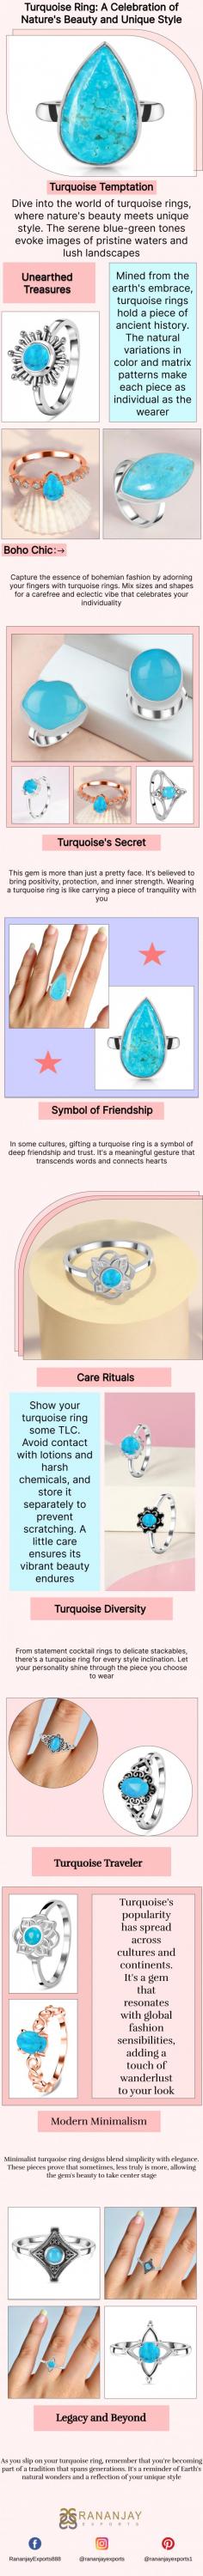 Care Rituals: Show your turquoise ring some TLC. Avoid contact with lotions and harsh chemicals, and store it separately to prevent scratching. A little care ensures its vibrant beauty endures.
Turquoise Diversity: From statement cocktail rings to delicate stackables, there's a turquoise ring for every style inclination. Let your personality shine through the piece you choose to wear